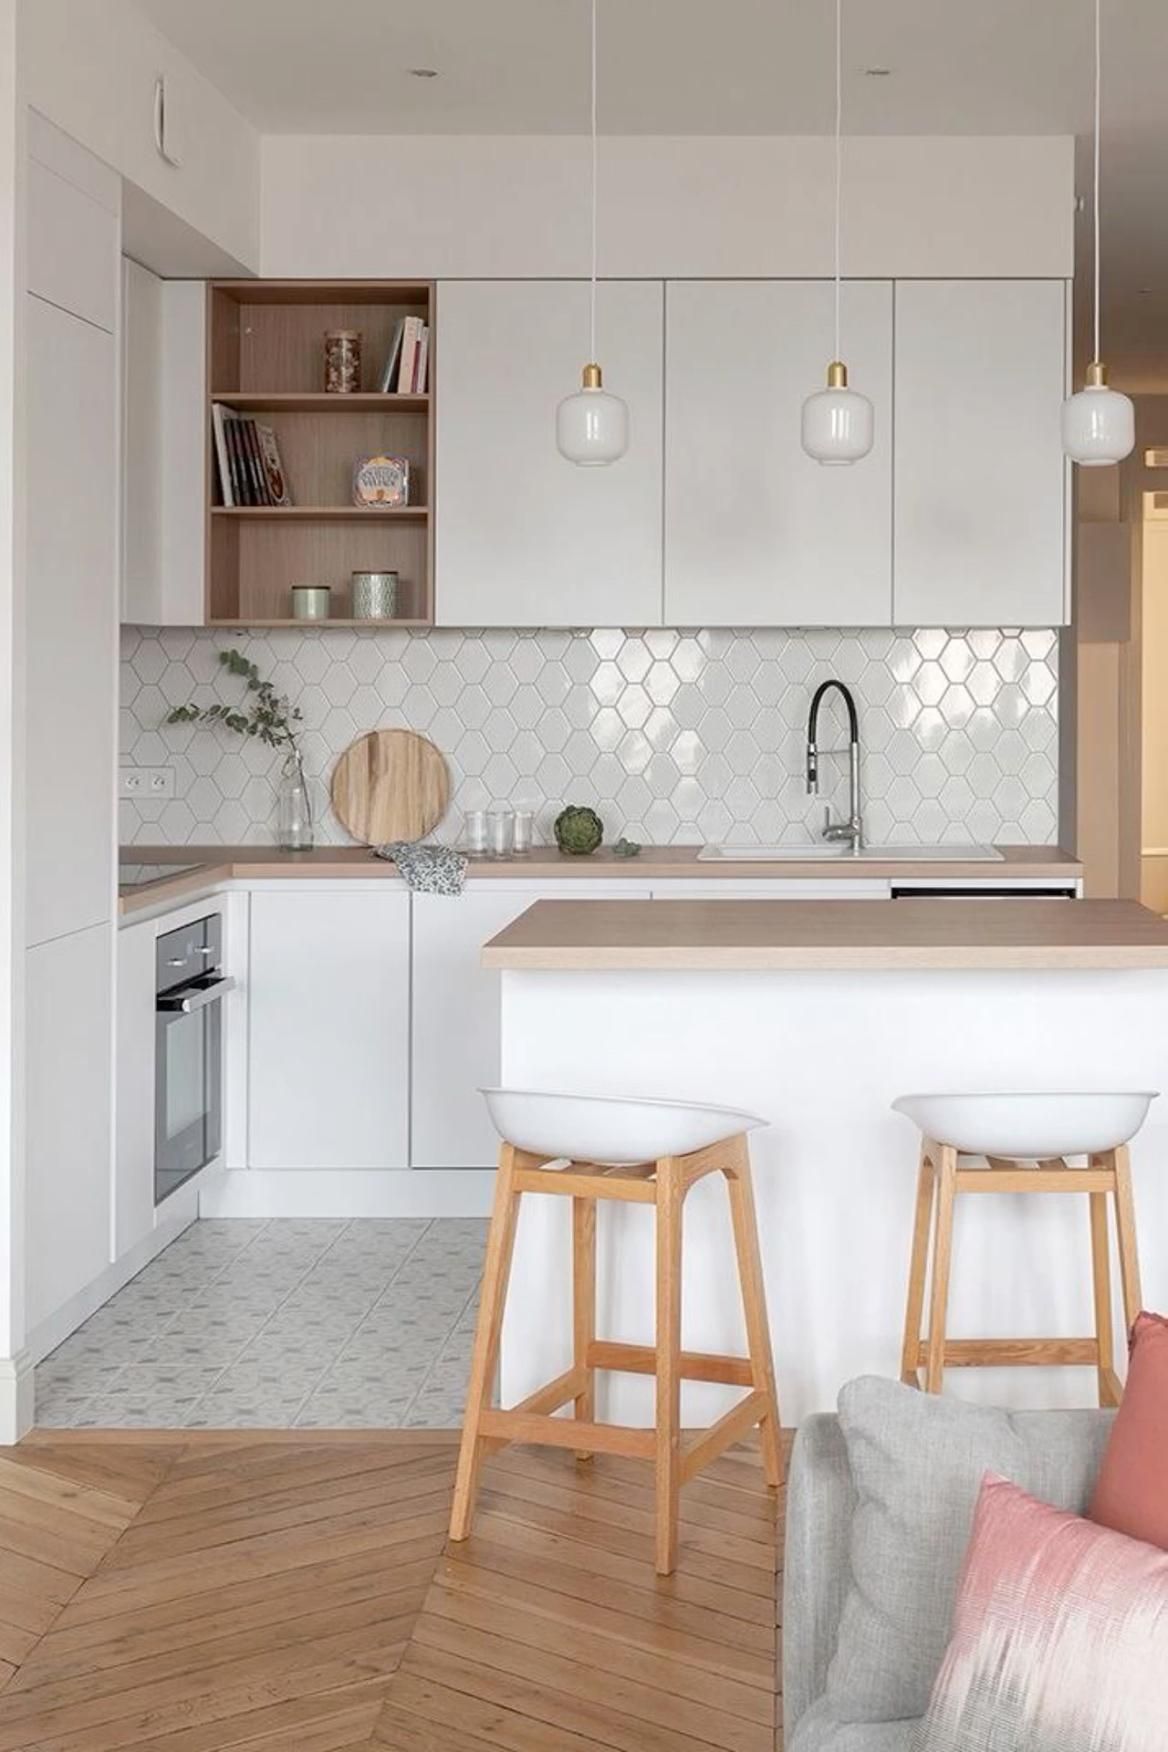 Making the Most of Your Small Kitchen: Tips and Tricks for Limited Space